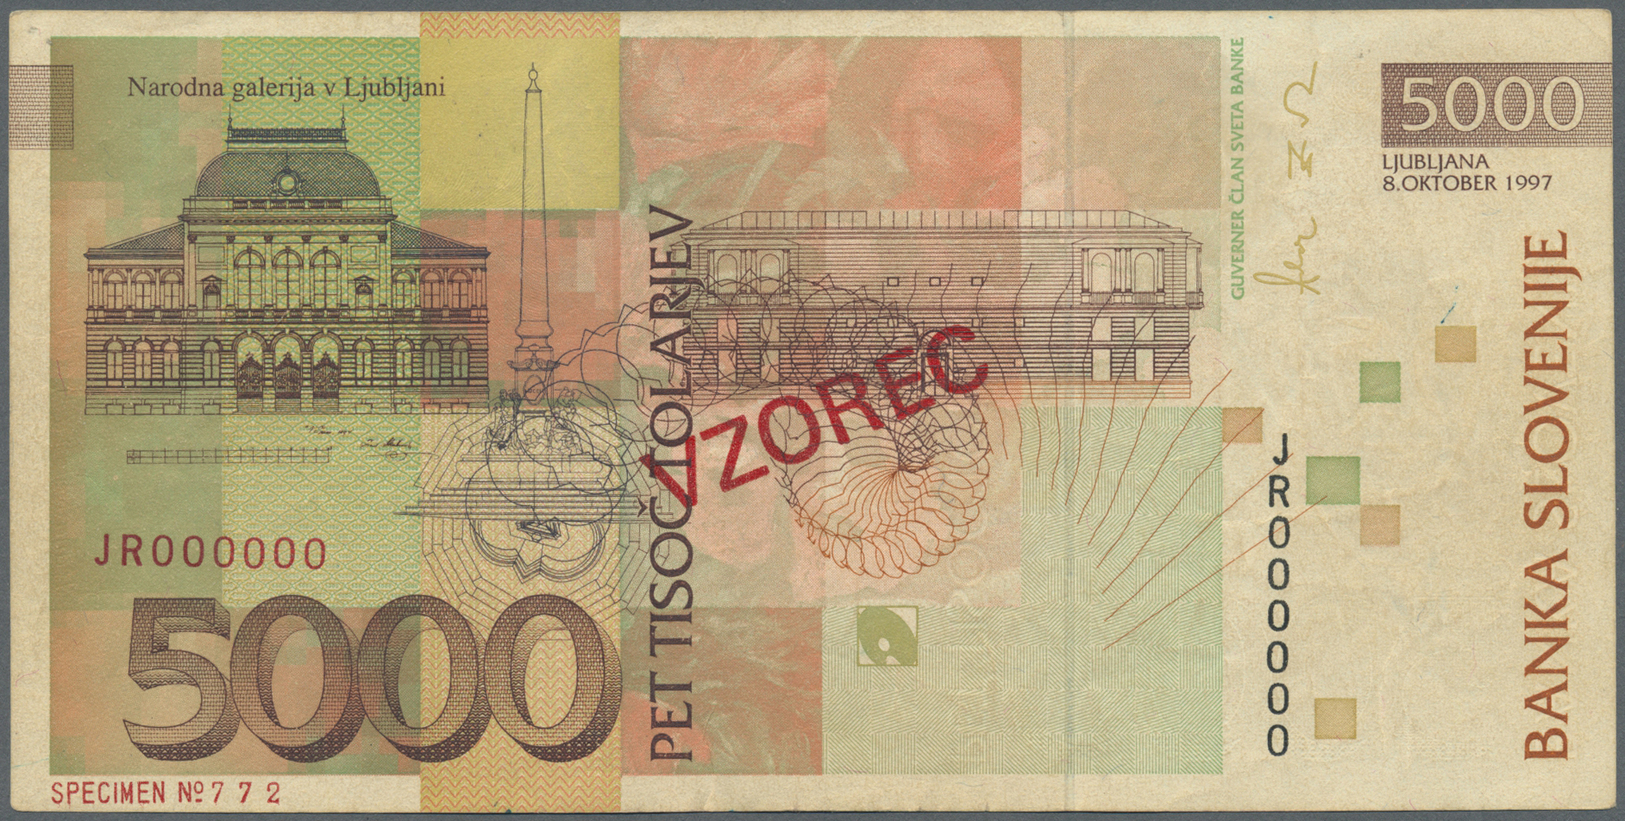 02918 Slovakia / Slovakei: Set Of 2 Specimen Notes Containing 5000 Tolarjev 1997 In A Design At Upper Left From Portrait - Slovaquie